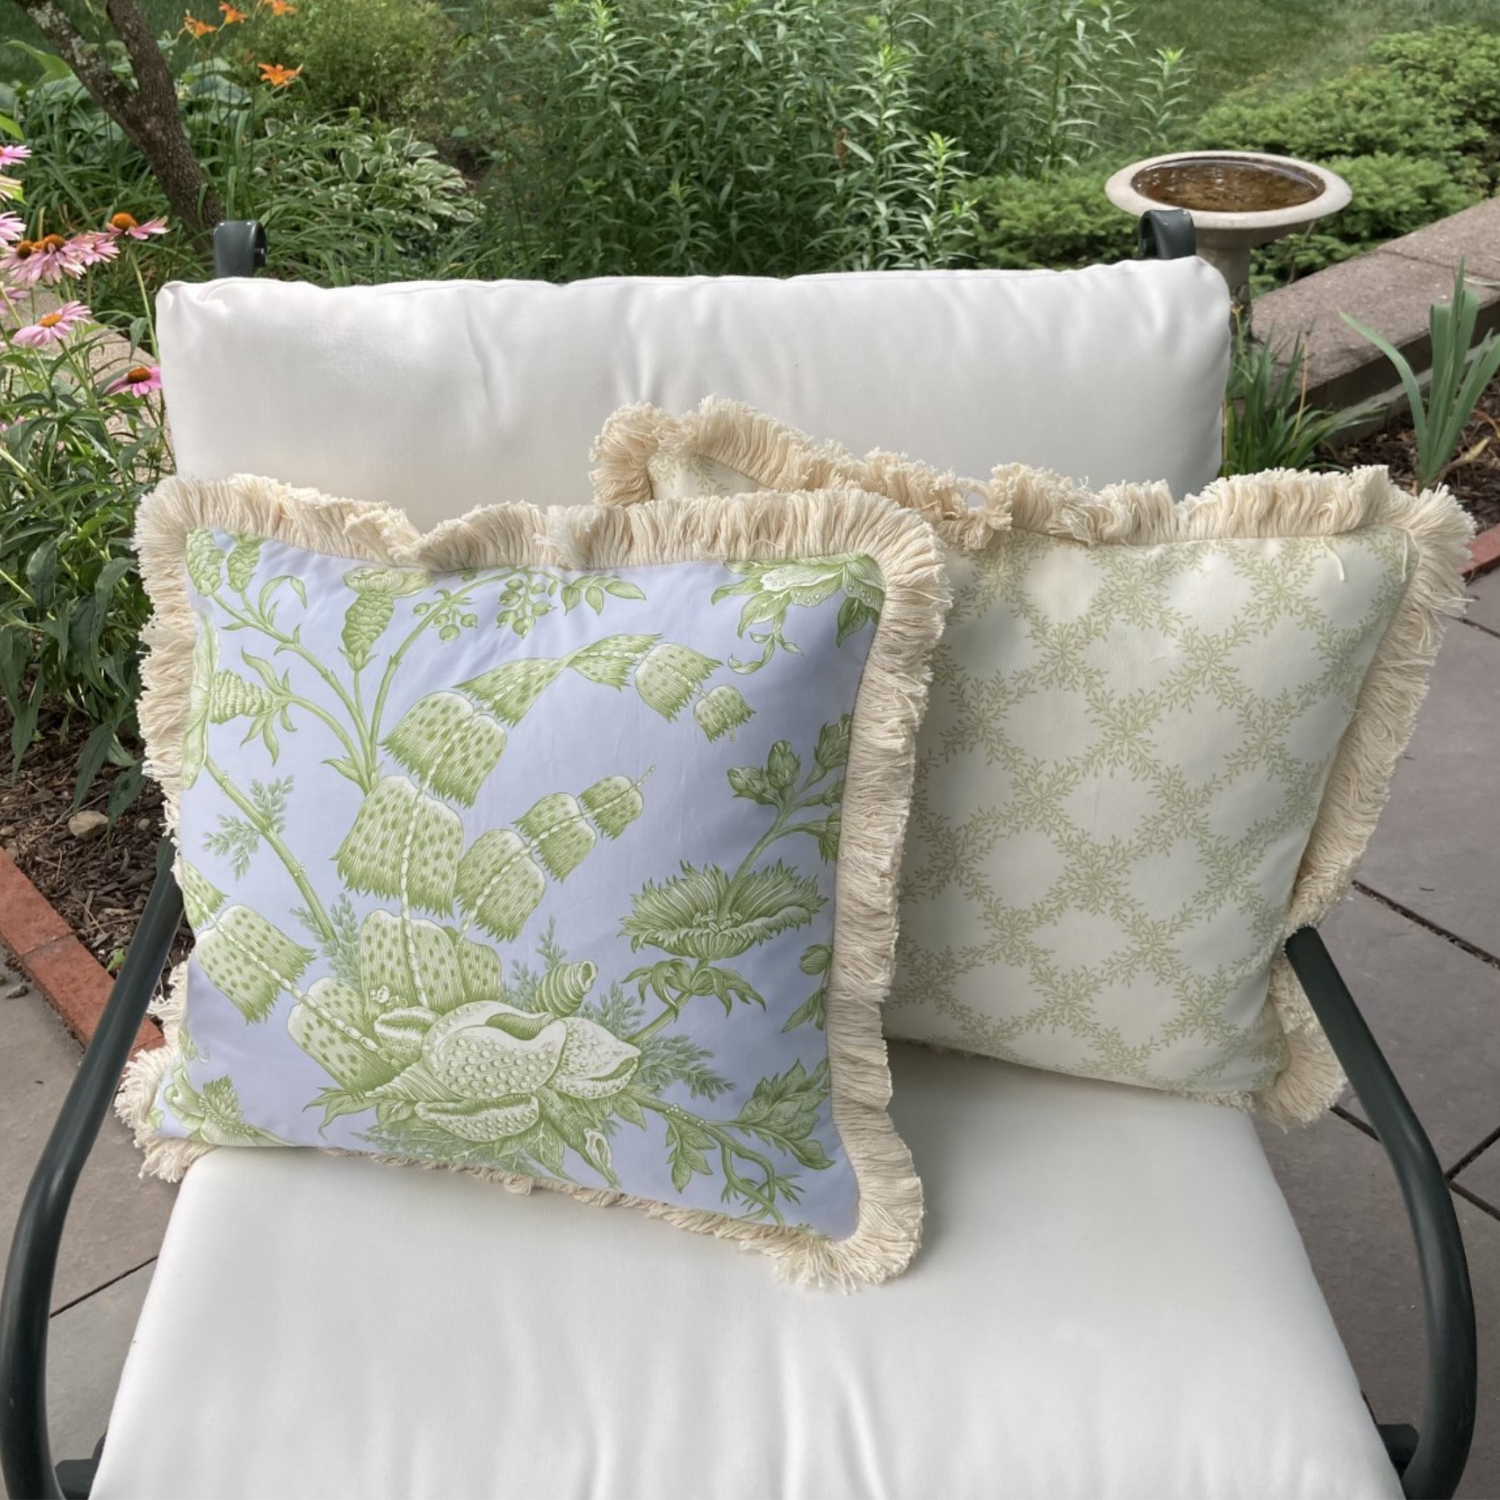 Down & Feather 18x18 - Pillows